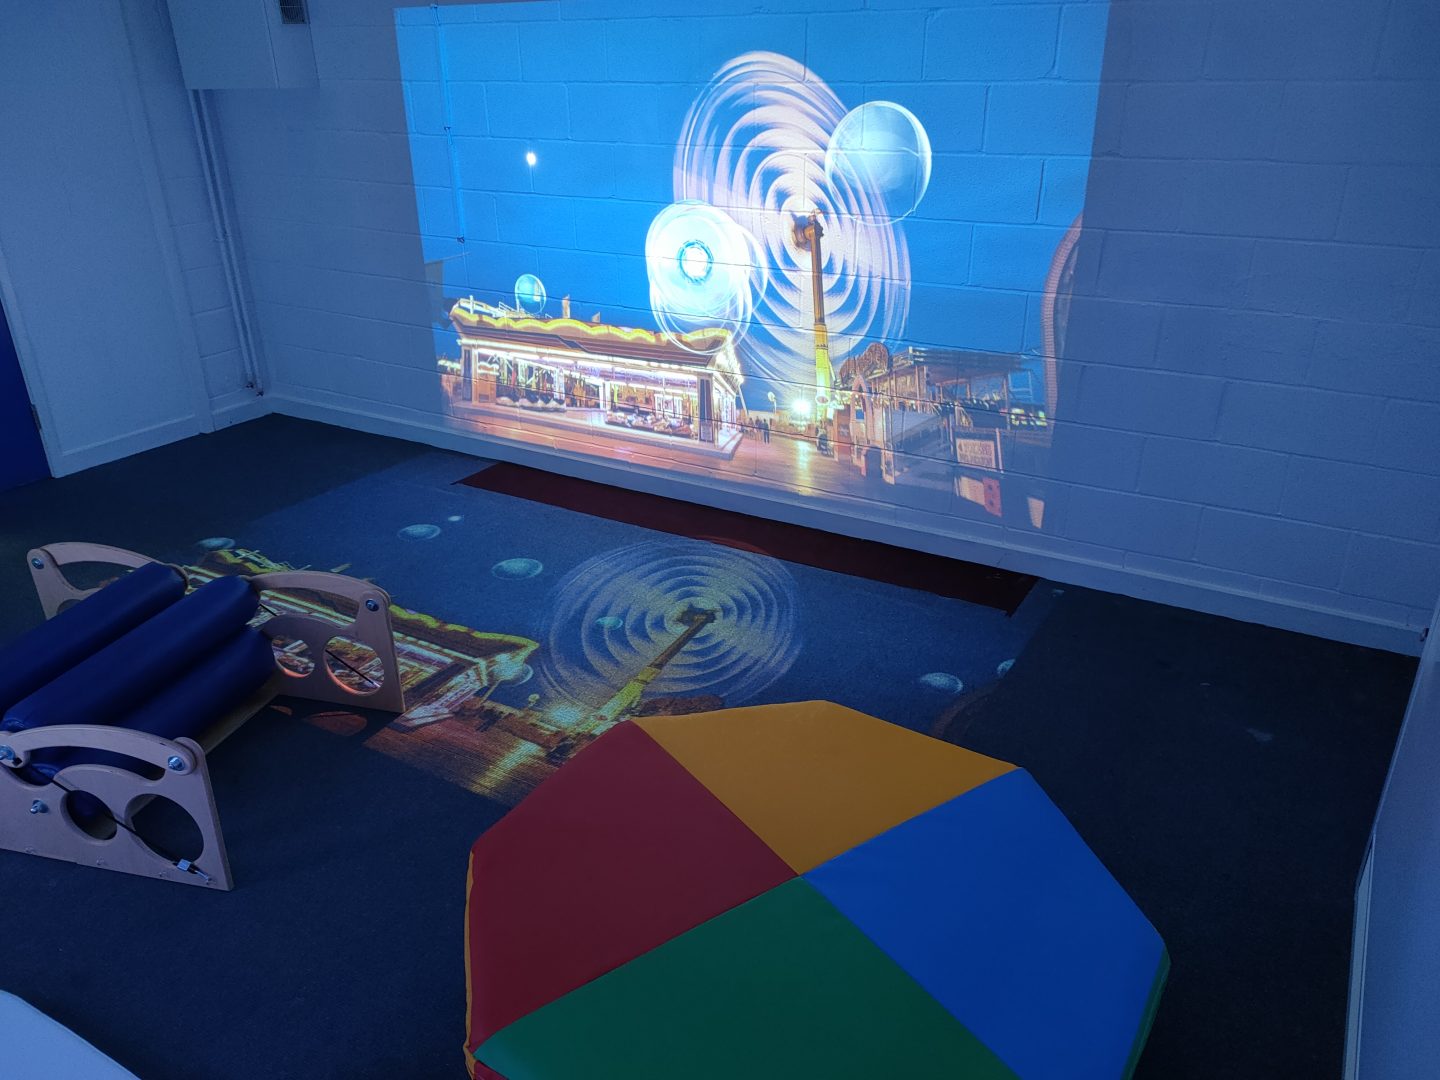 Immersive area within a sensory room showing the interactive bubble pop on the wall and floor